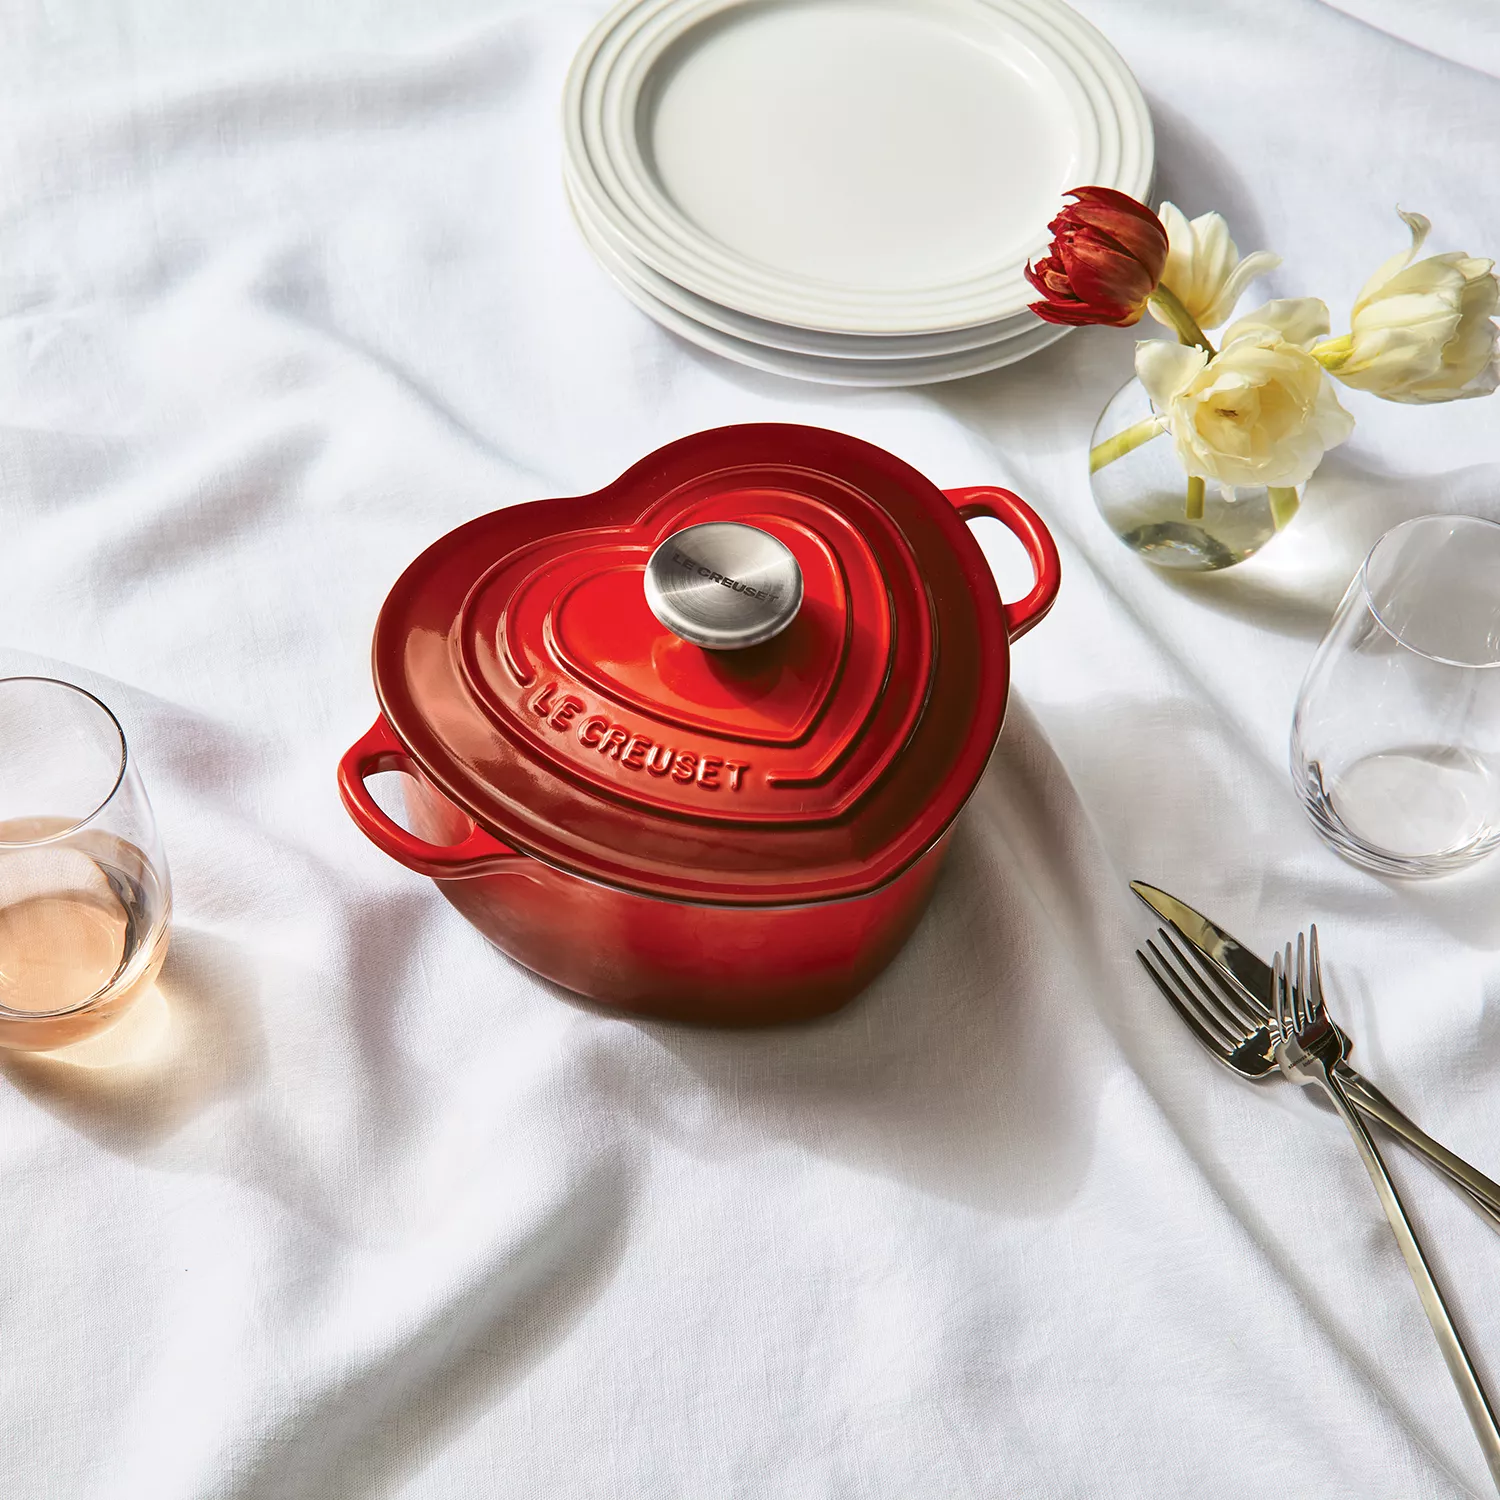 Le Creuset Heart Shaped 2 Liter White Cast Iron Dutch Oven for